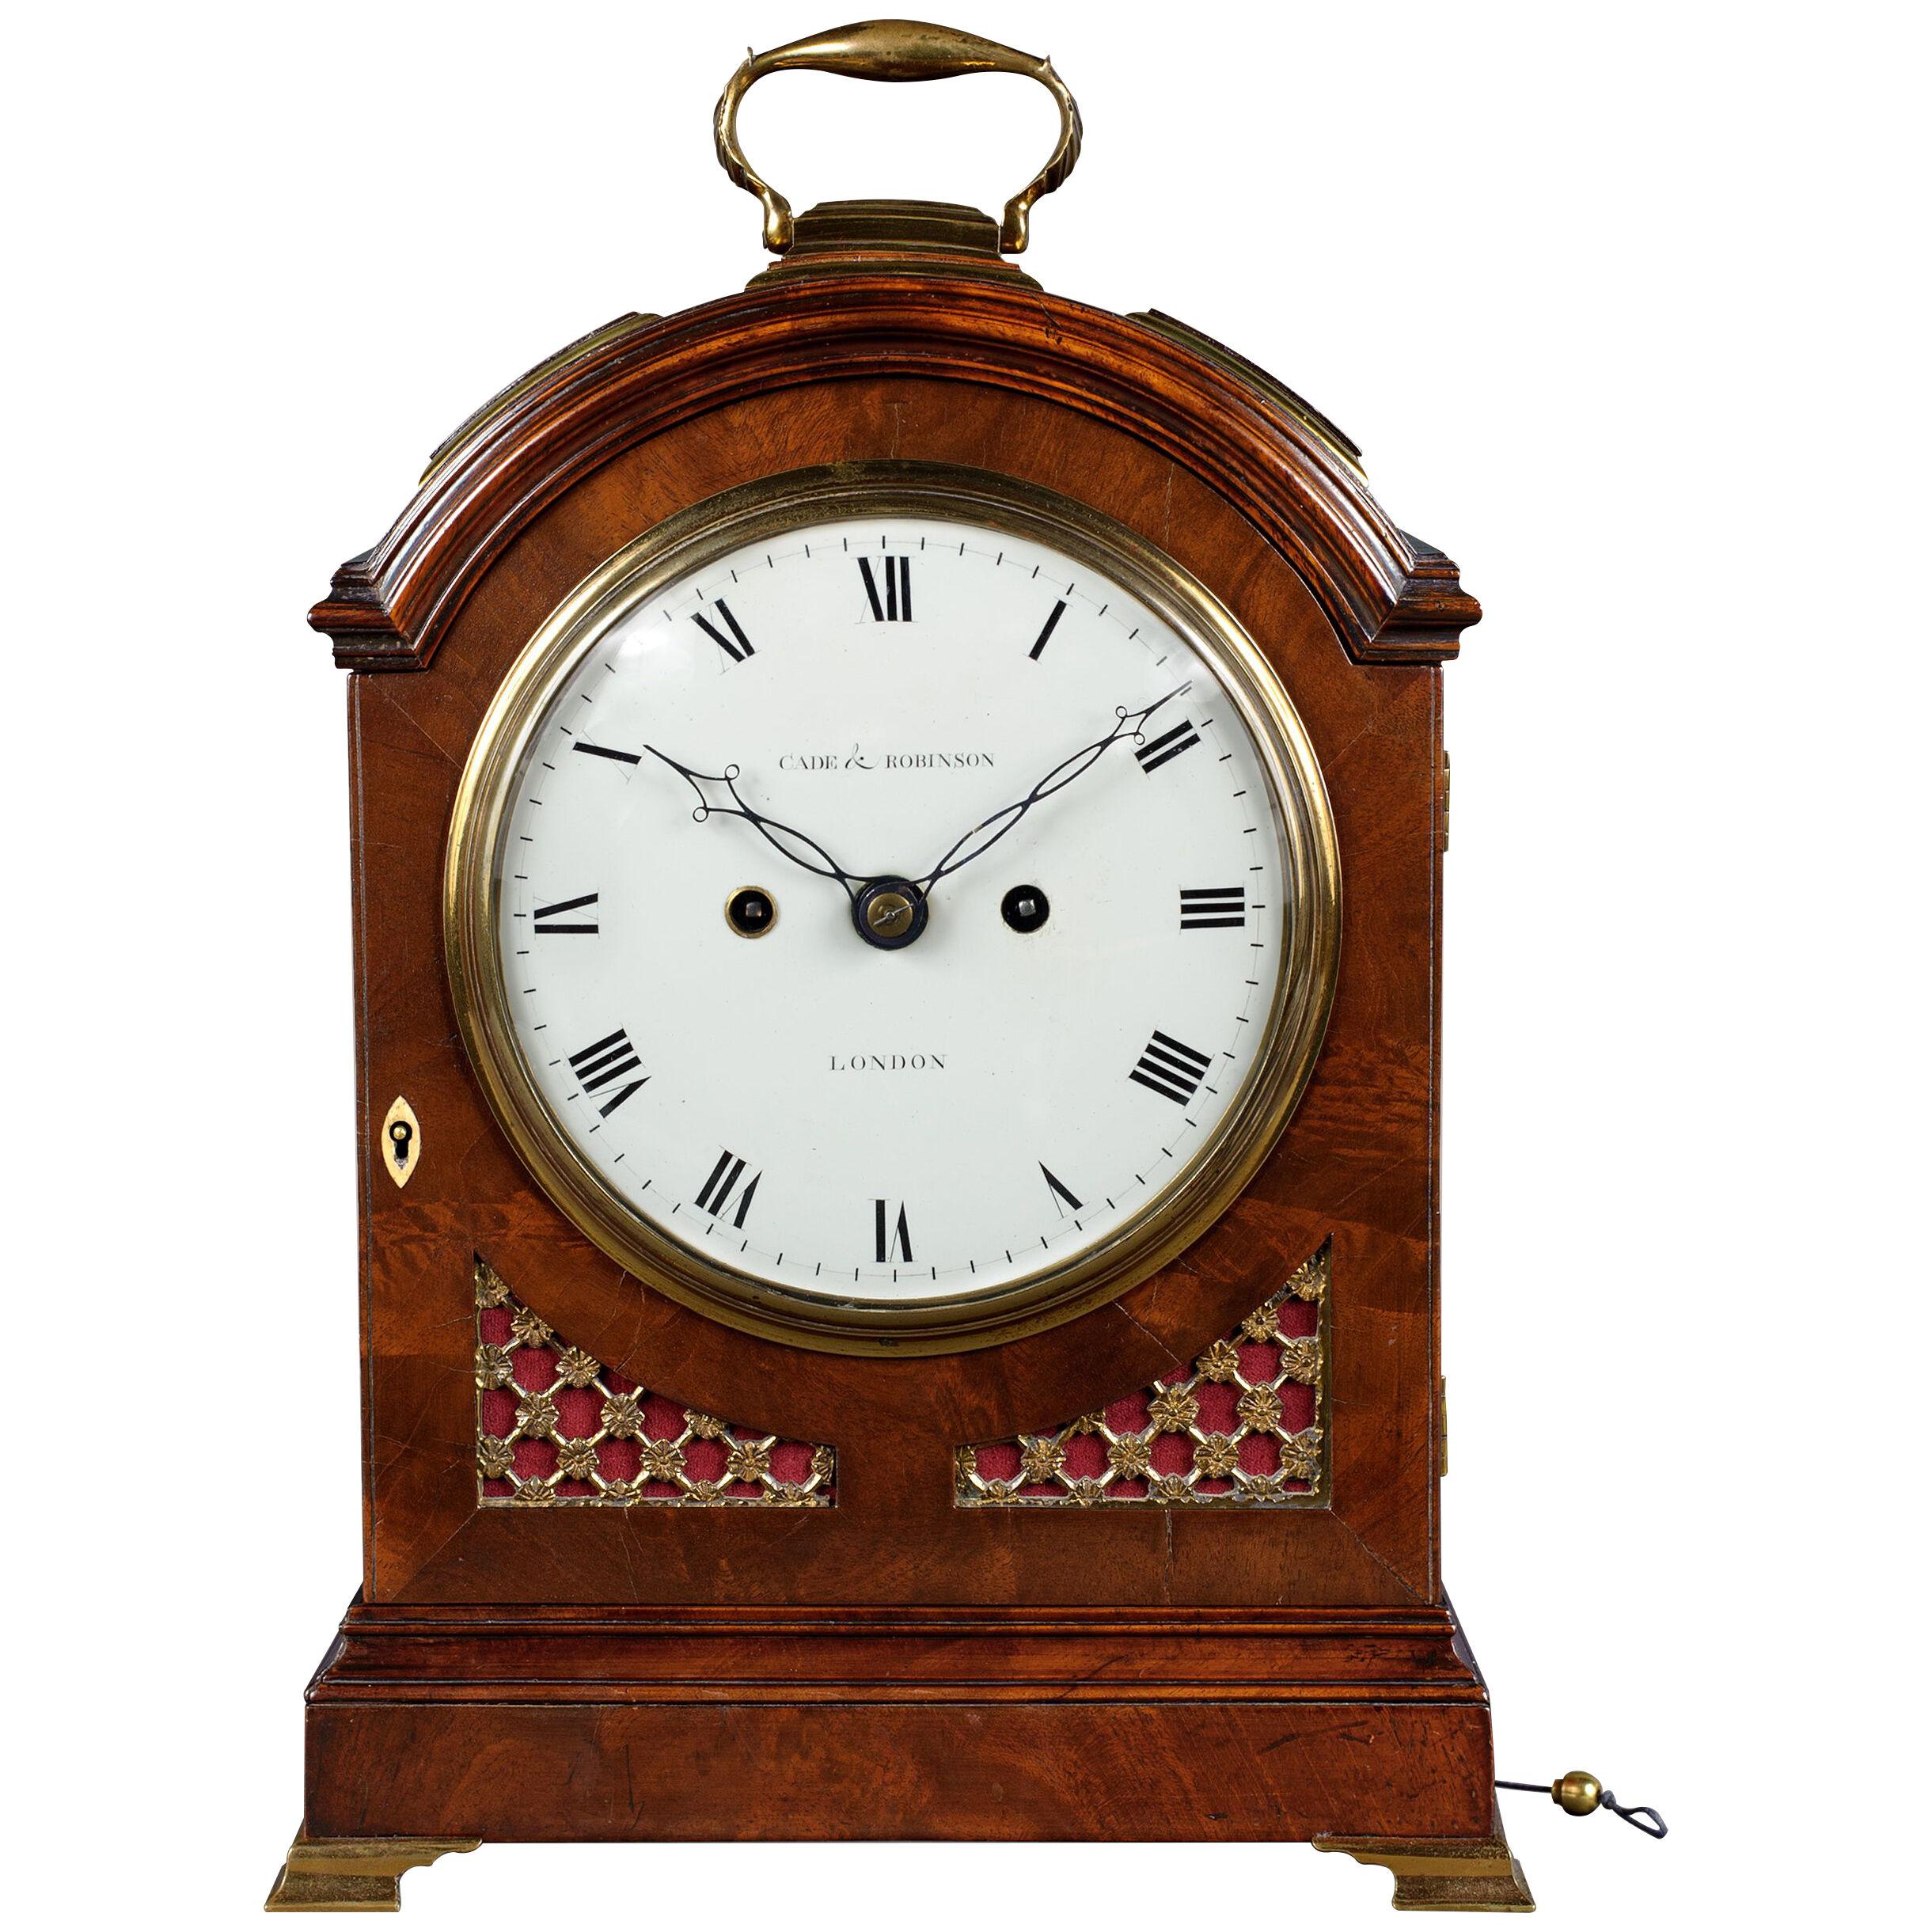 ANTIQUE REGENCY MAHOGANY ARCHED-TOP BRACKET CLOCK BY CADE & ROBINSON OF LONDON